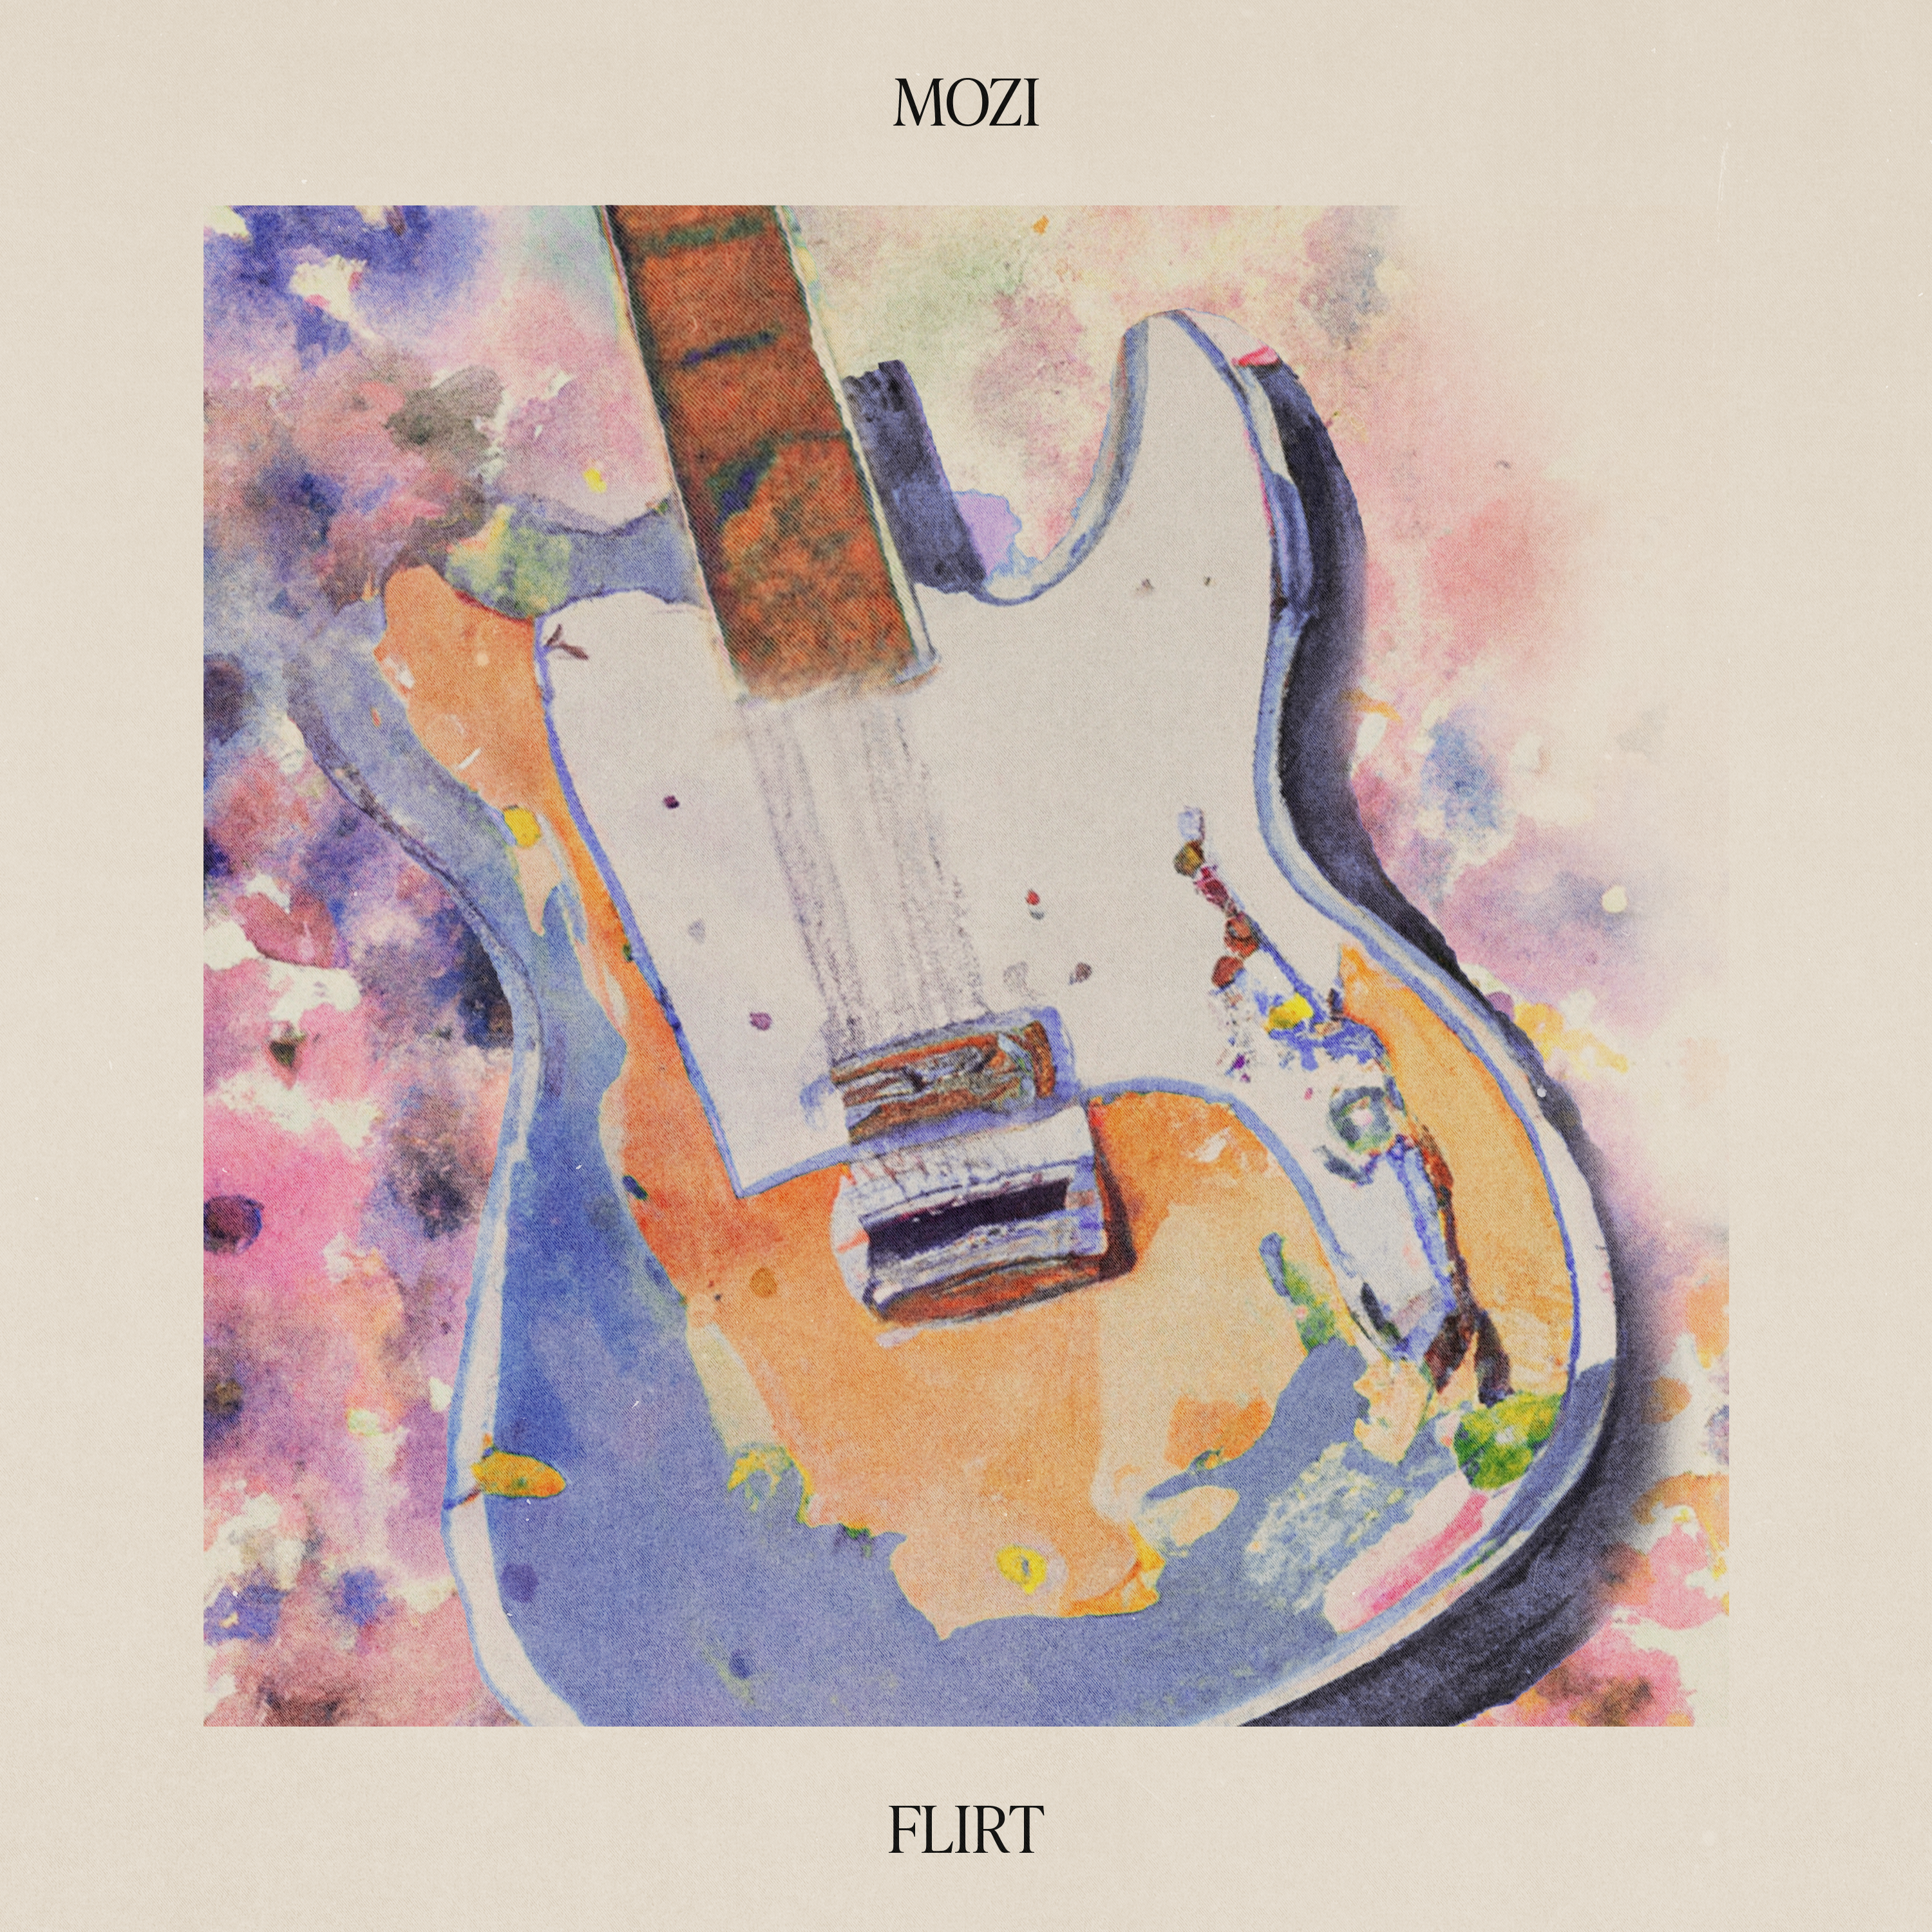 a Guitar of Mozi drawn with watercolor for MOZI Single FlIRT